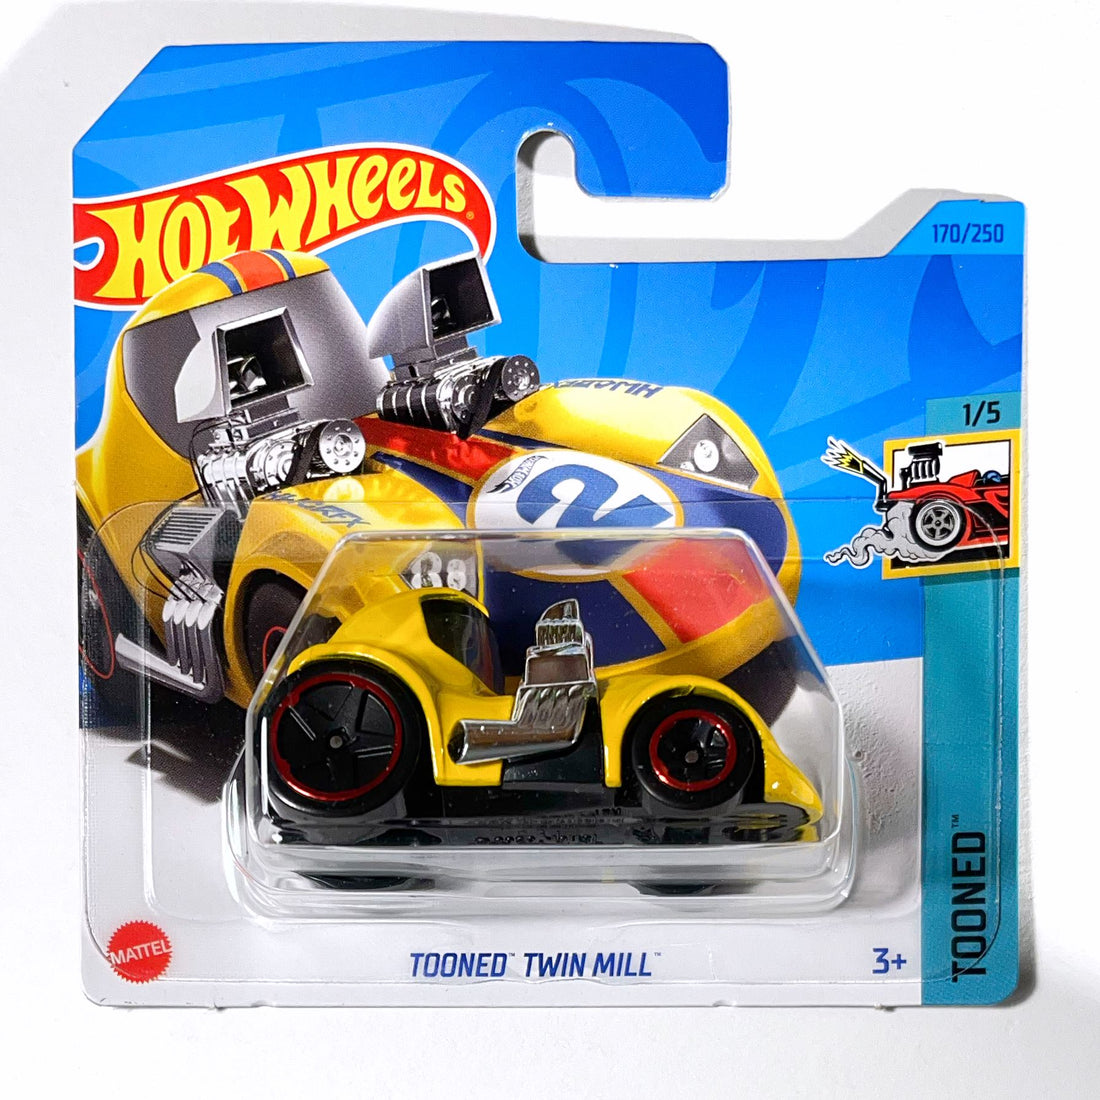 Hot Wheels Tooned Twin Mill 170/250 Tooned 1/5 2023 1:64